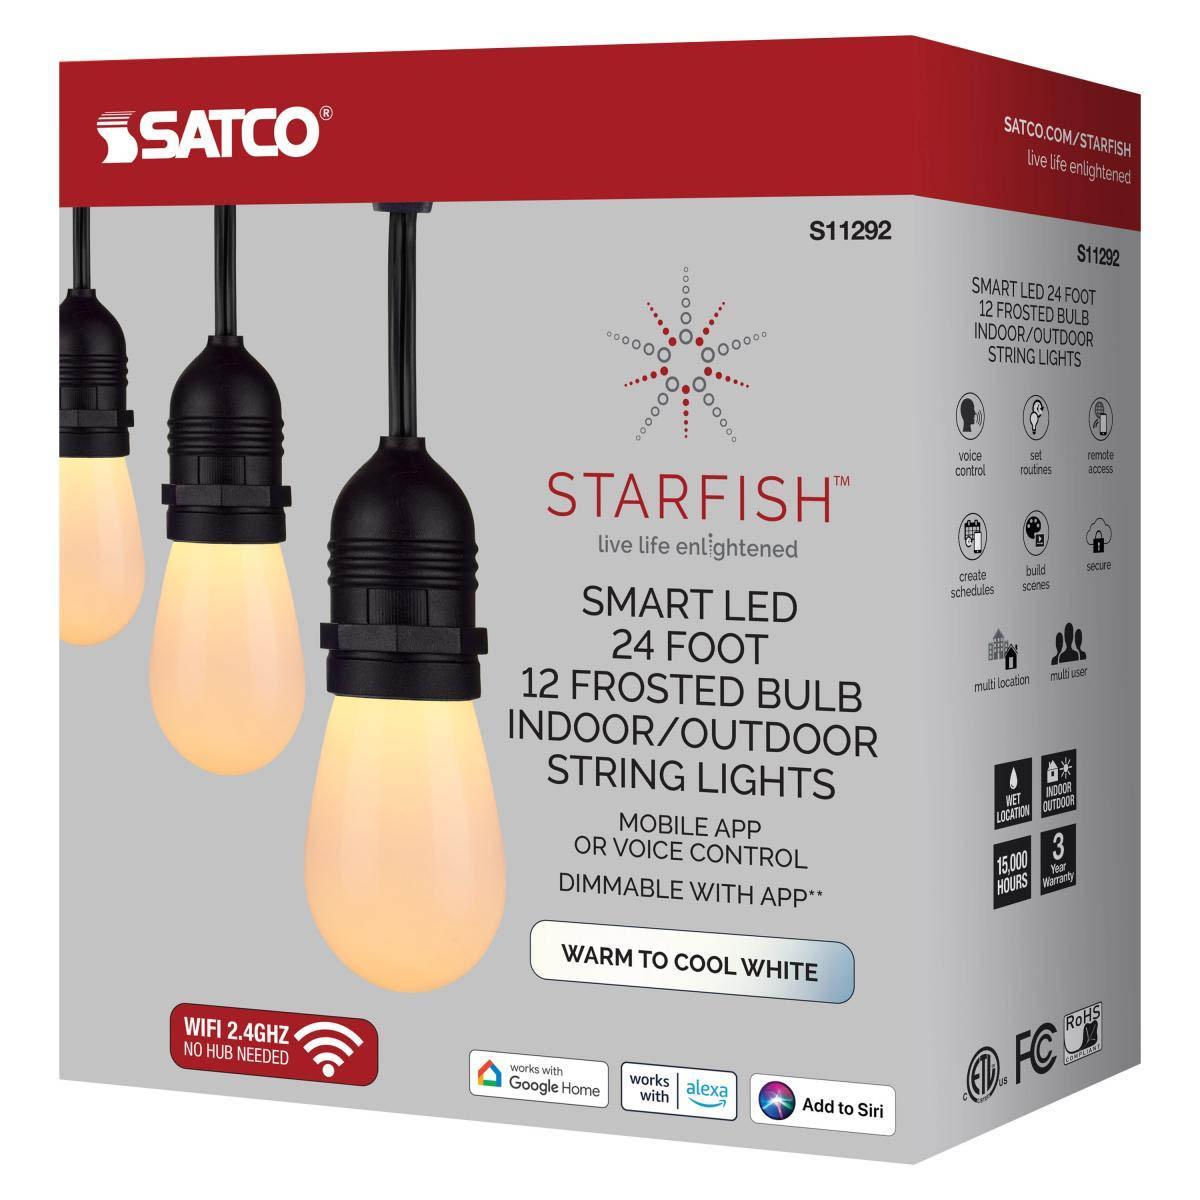 Starfish Wi Fi smart LED indoor/outdoor string light, Tunable White, 24 Feet, 12 Frosted Bulb - Bees Lighting